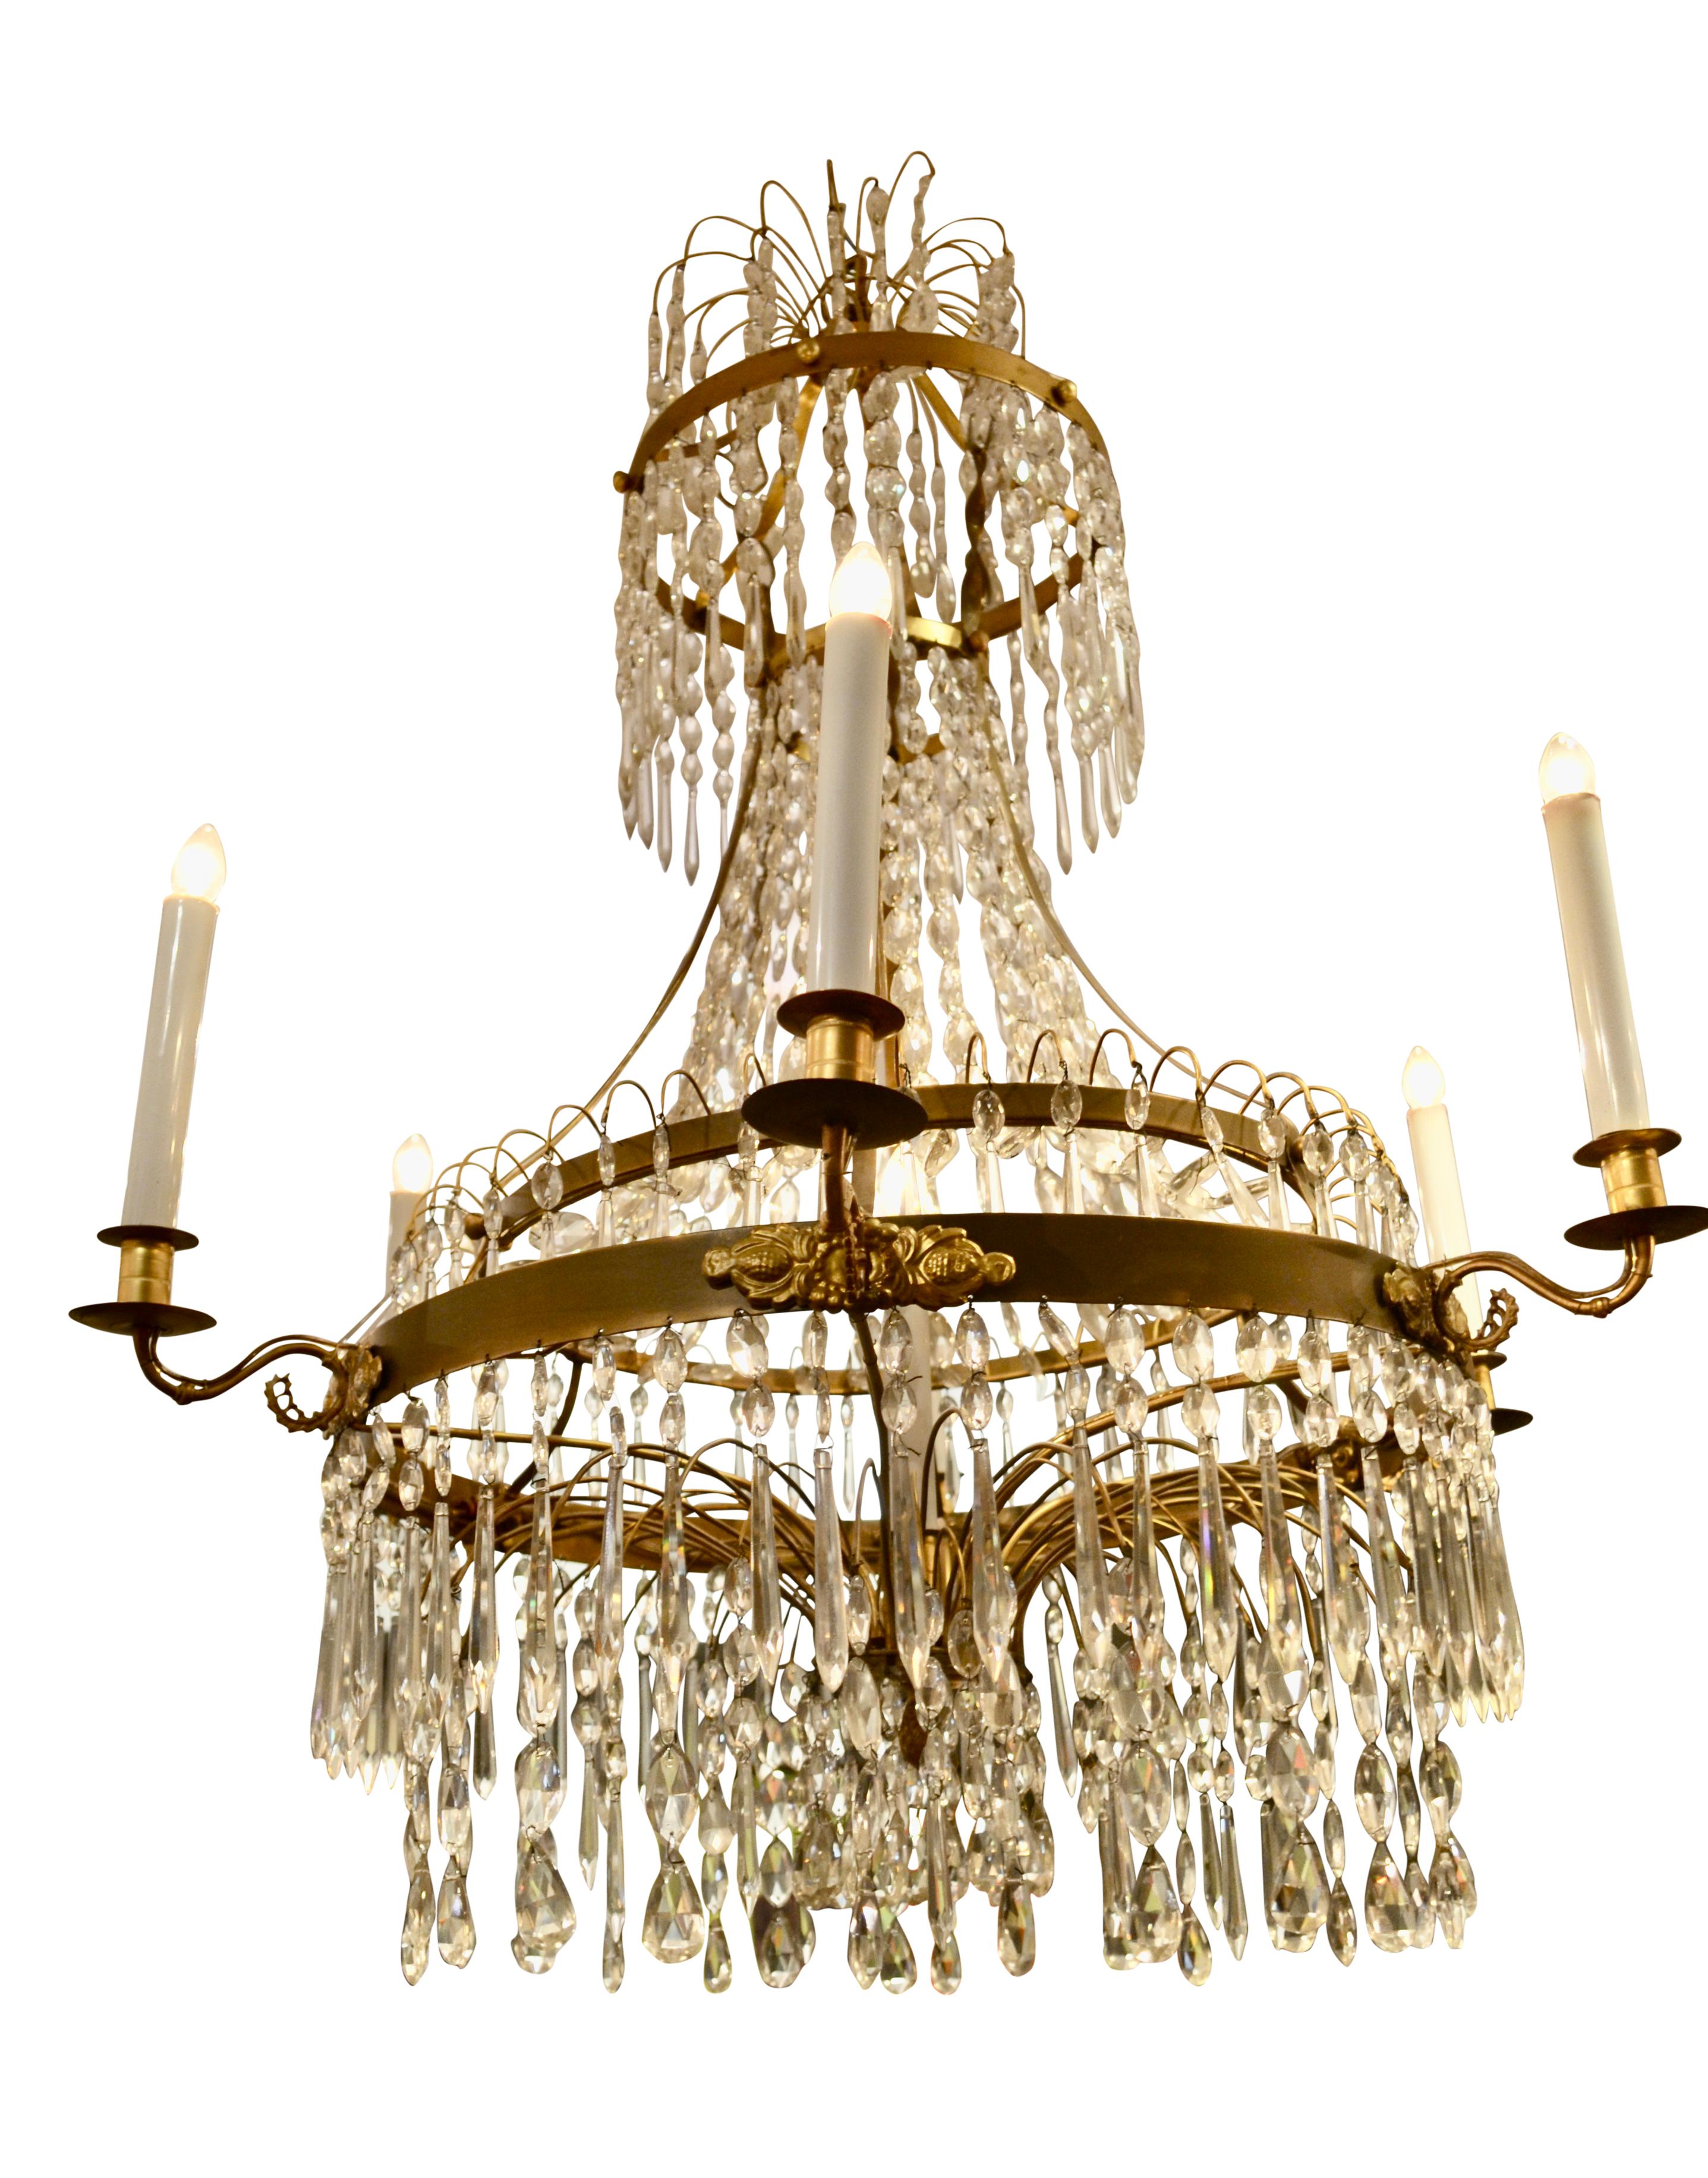 A neoclassic cut crystal chandelier, the three circular brass frames of differing dimensions are all hung with long cut crystals and almond shaped drops and chains. The bottom section features a spray of curved narrow brass rods which also support